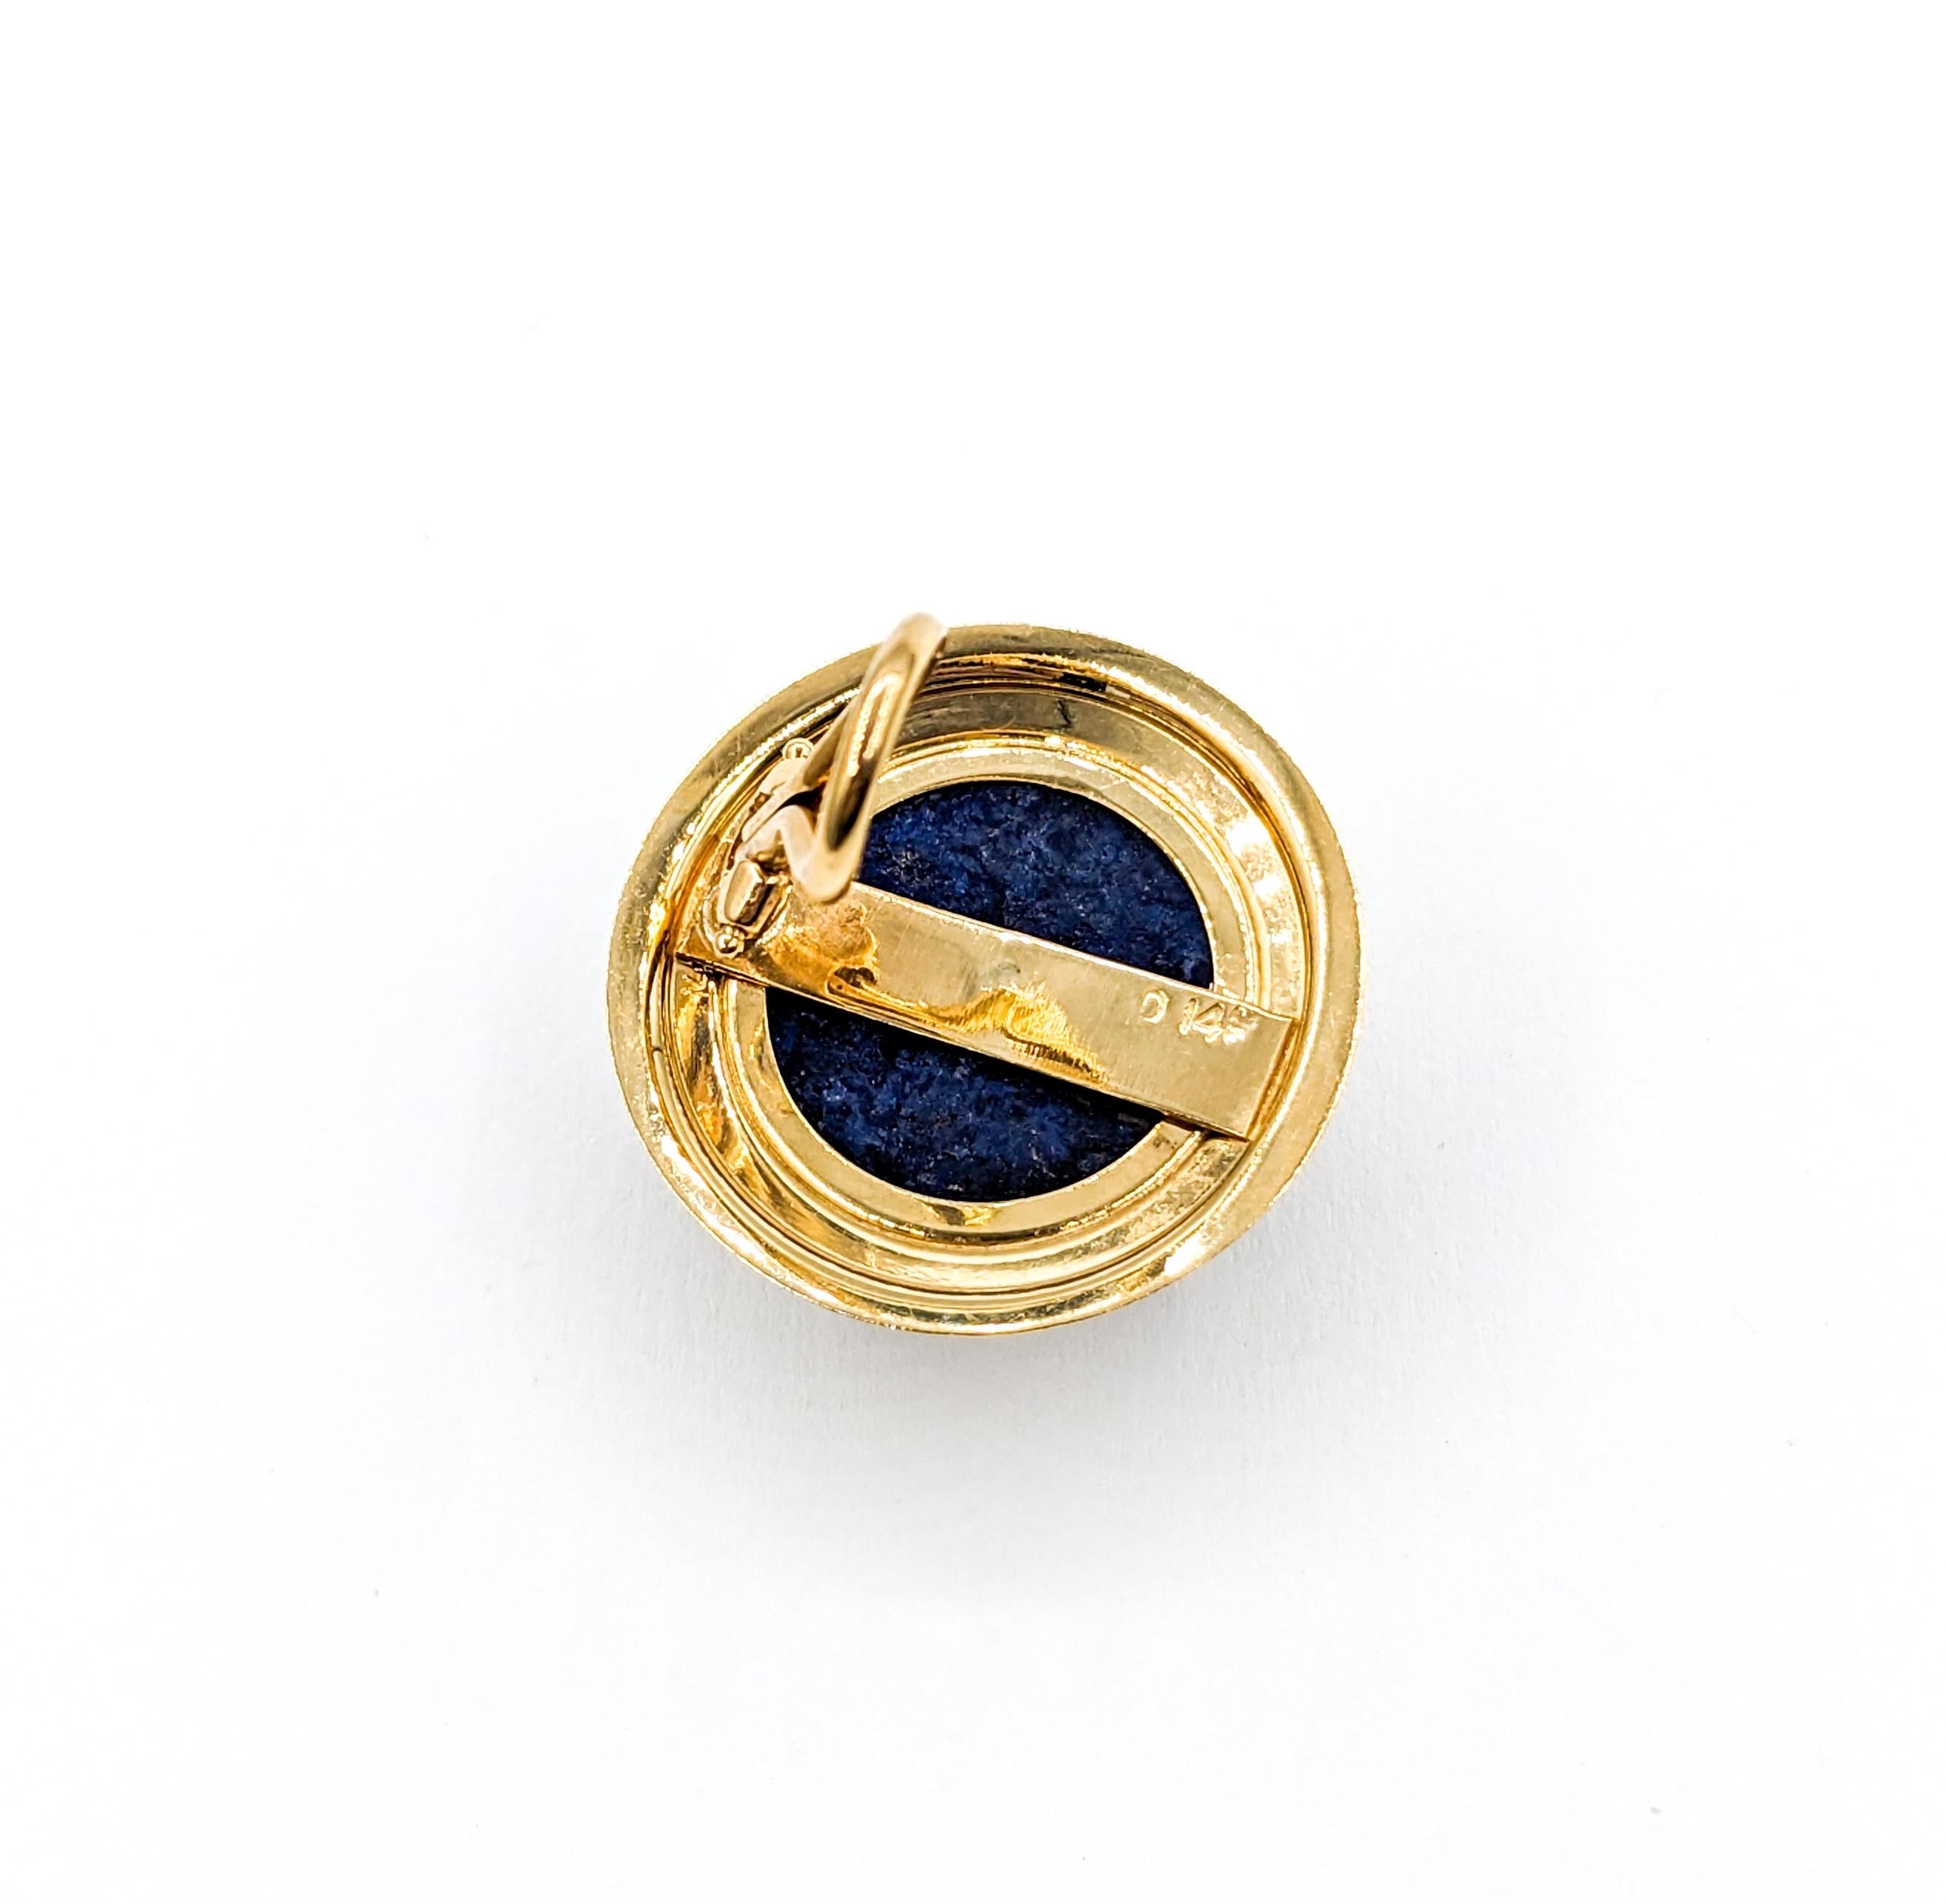 Statement Gold & Cabochon Lapis Clip On Earrings In Excellent Condition For Sale In Bloomington, MN